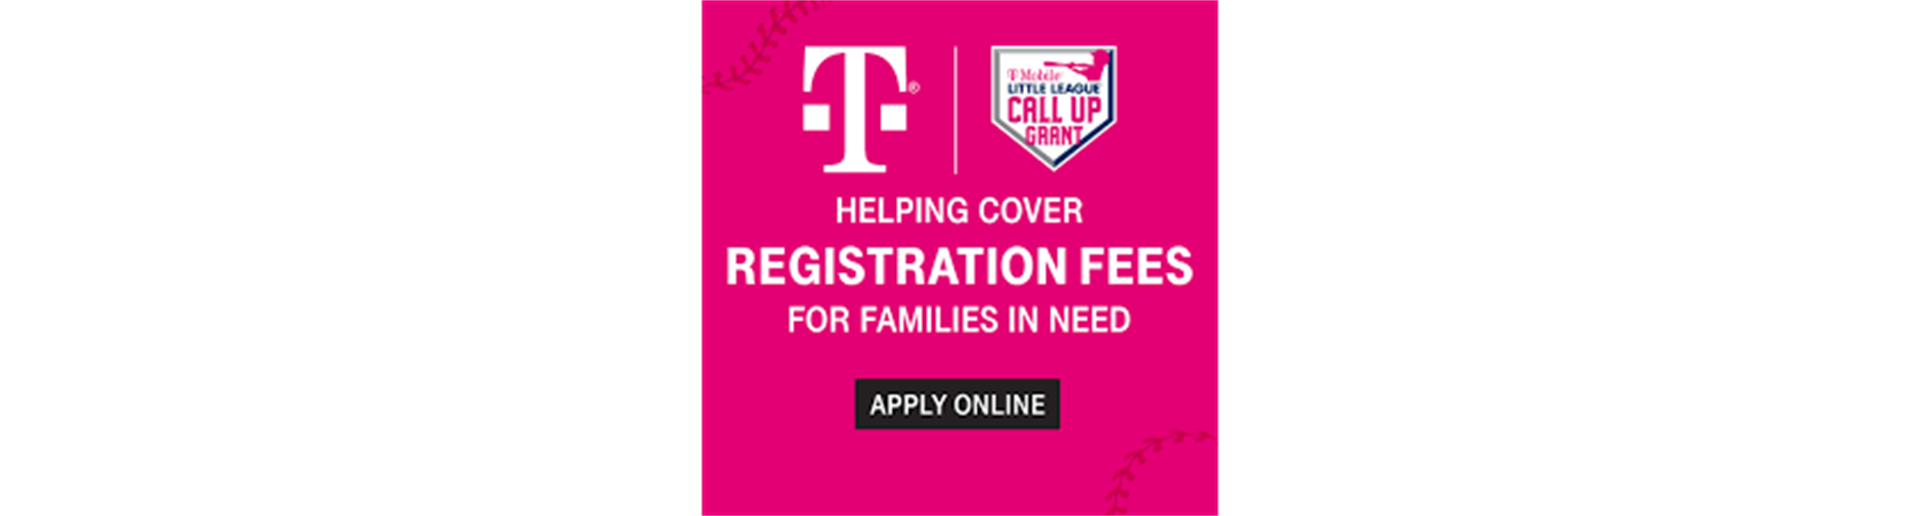 T-MOBILE CALL UP GRANT